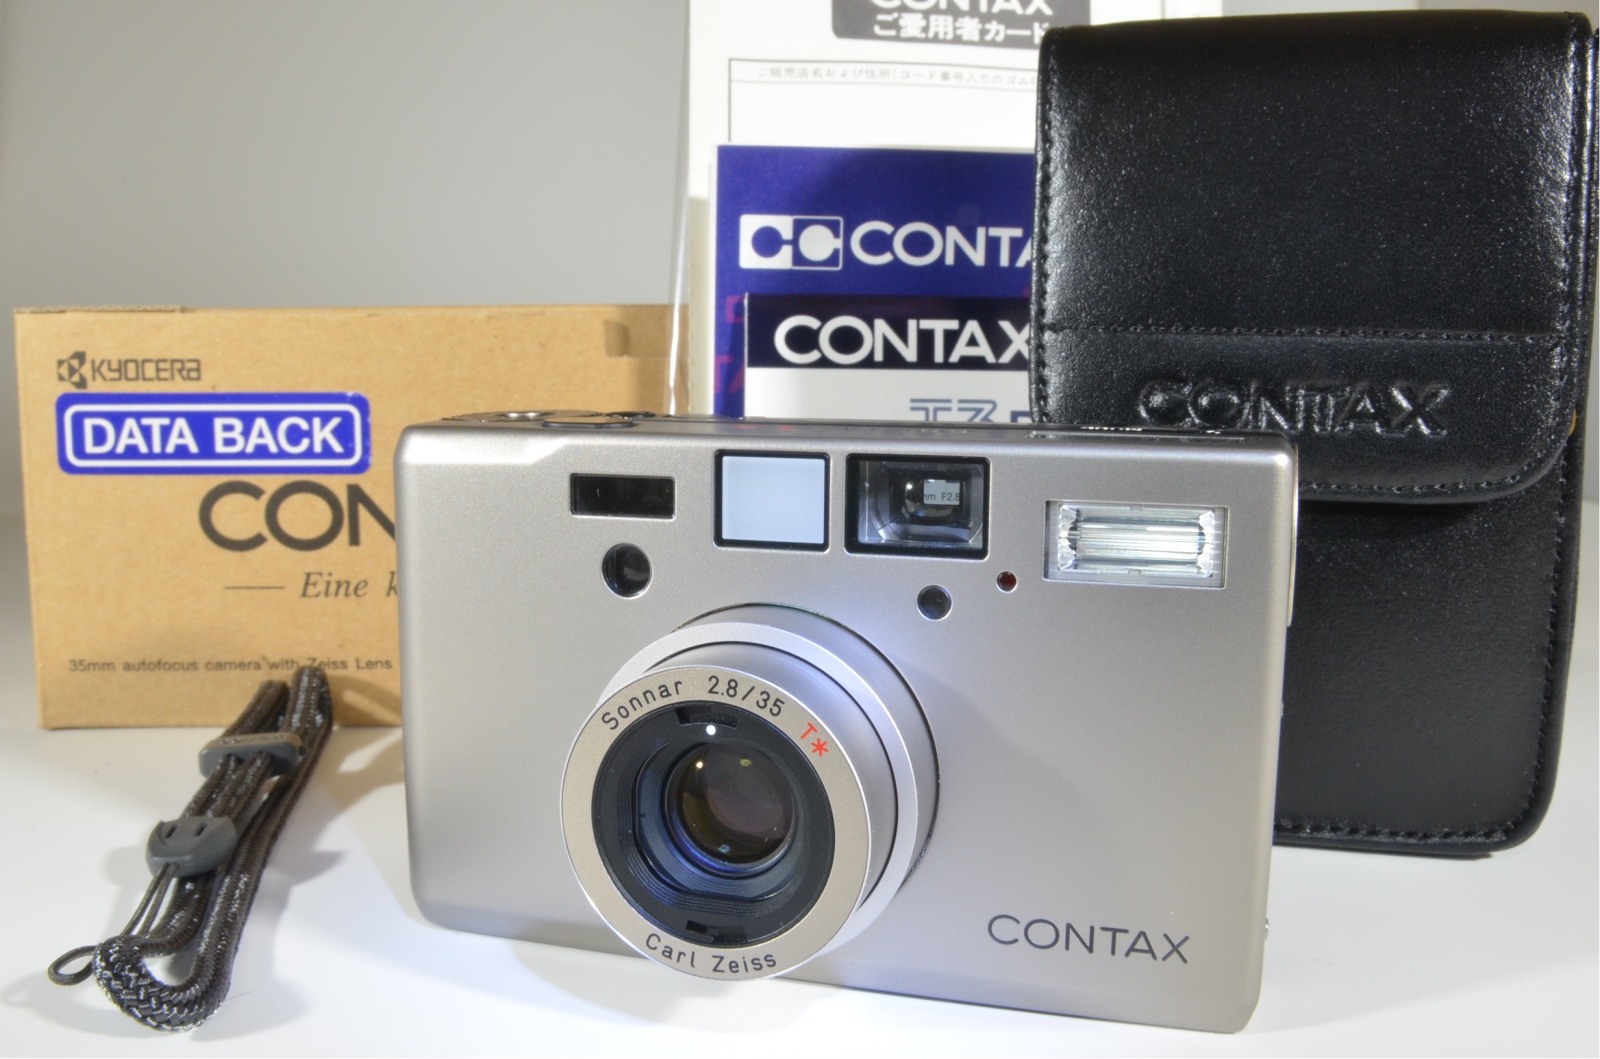 contax t3 data back point & shoot 35mm film camera